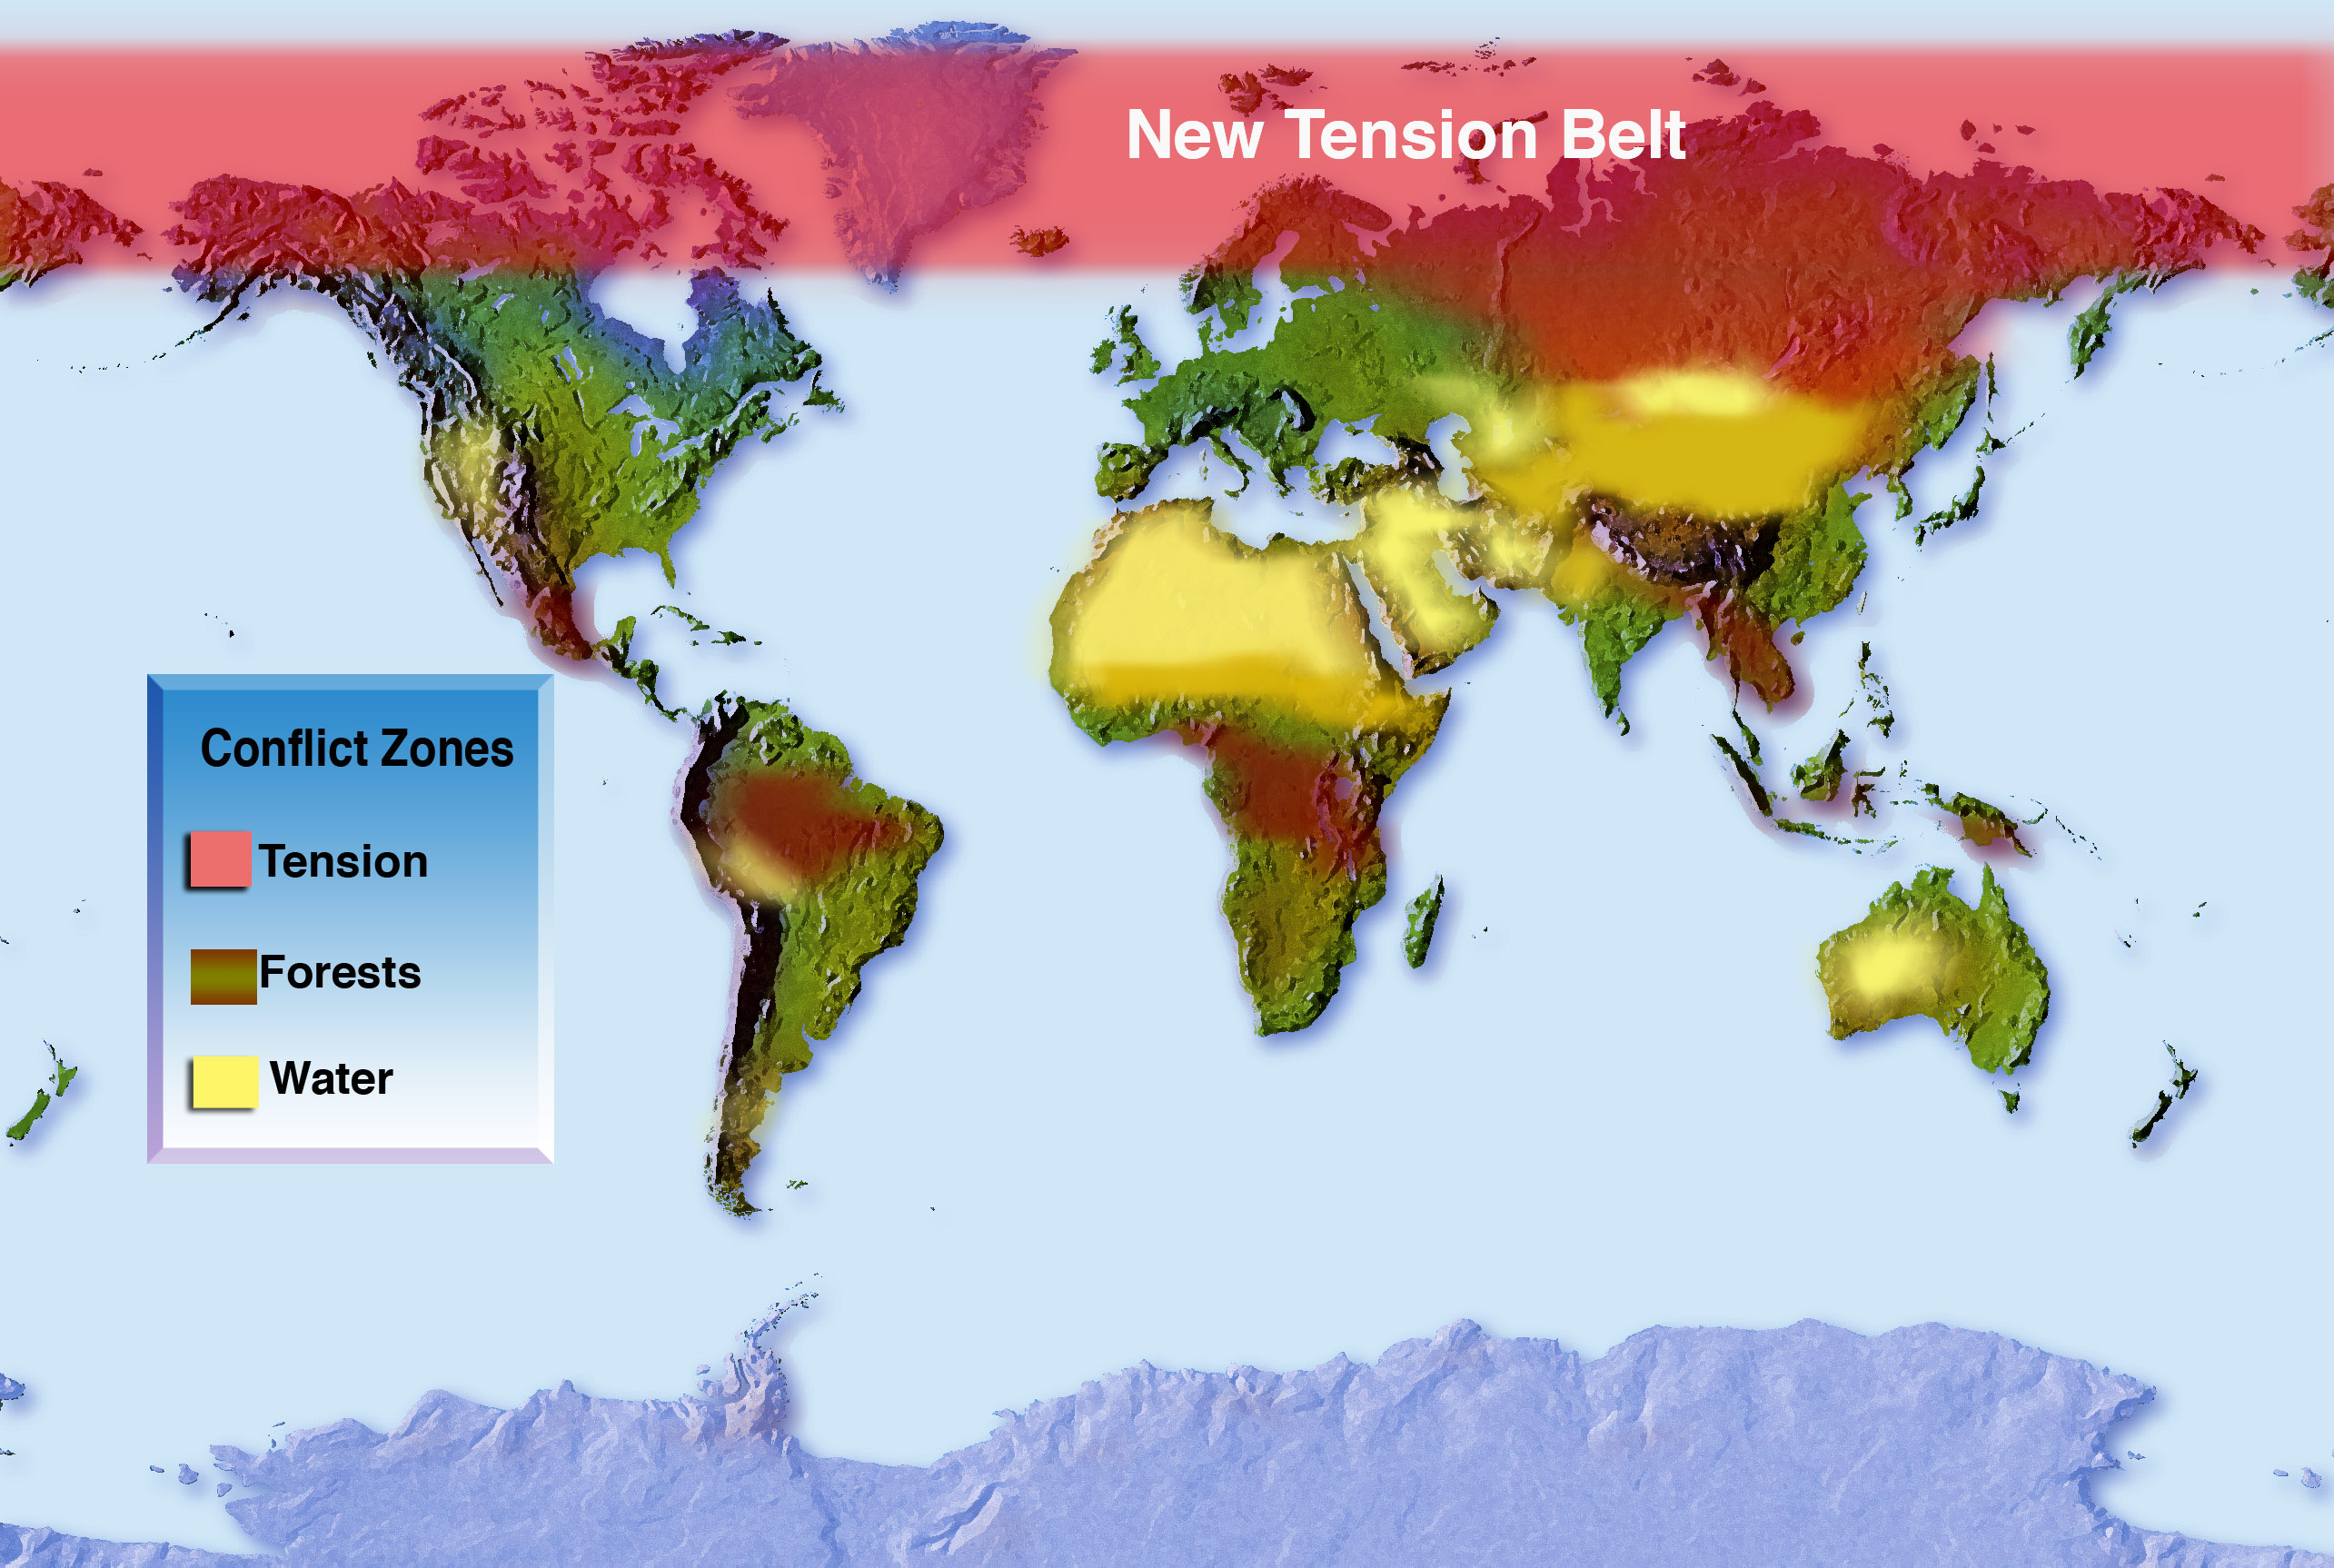 The New Tension Belt Map